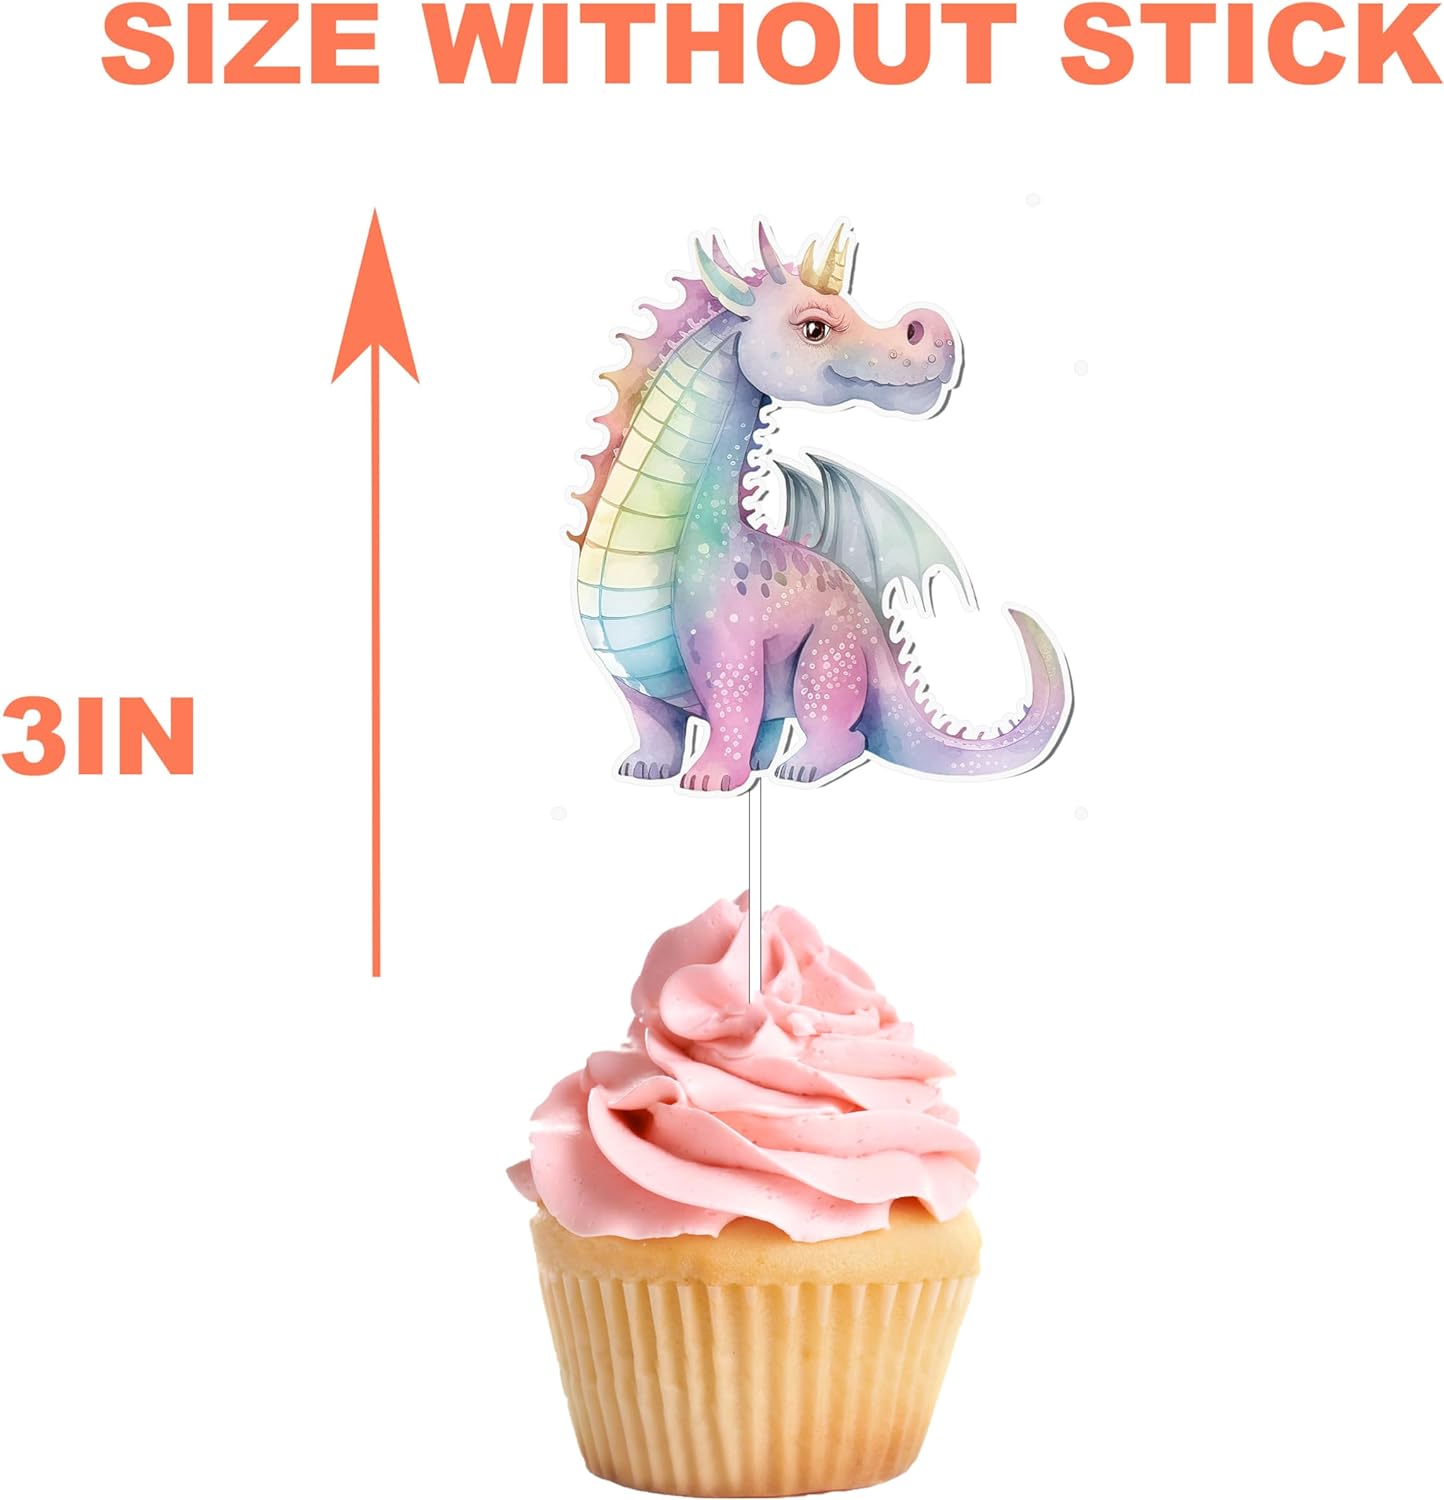 Enchanted Dragon and Castle Cupcake Toppers - Set of 10 - Magical Party Decor for Fantasy-Themed Events